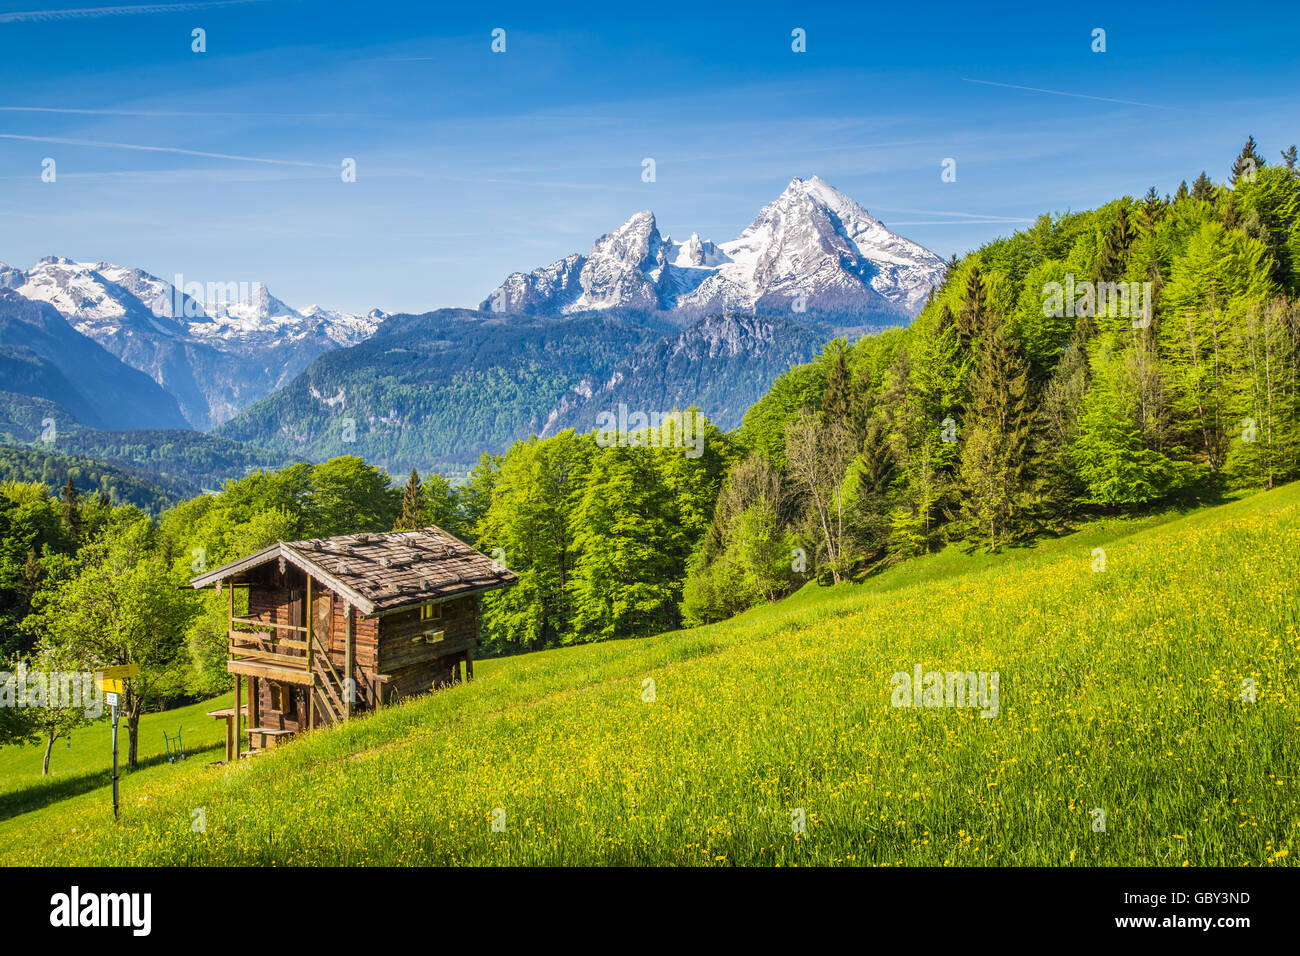 Idyllic mountain scenery with traditional mountain chalet in the Alps on a beautiful sunny day with blue sky in springtime Stock Photo